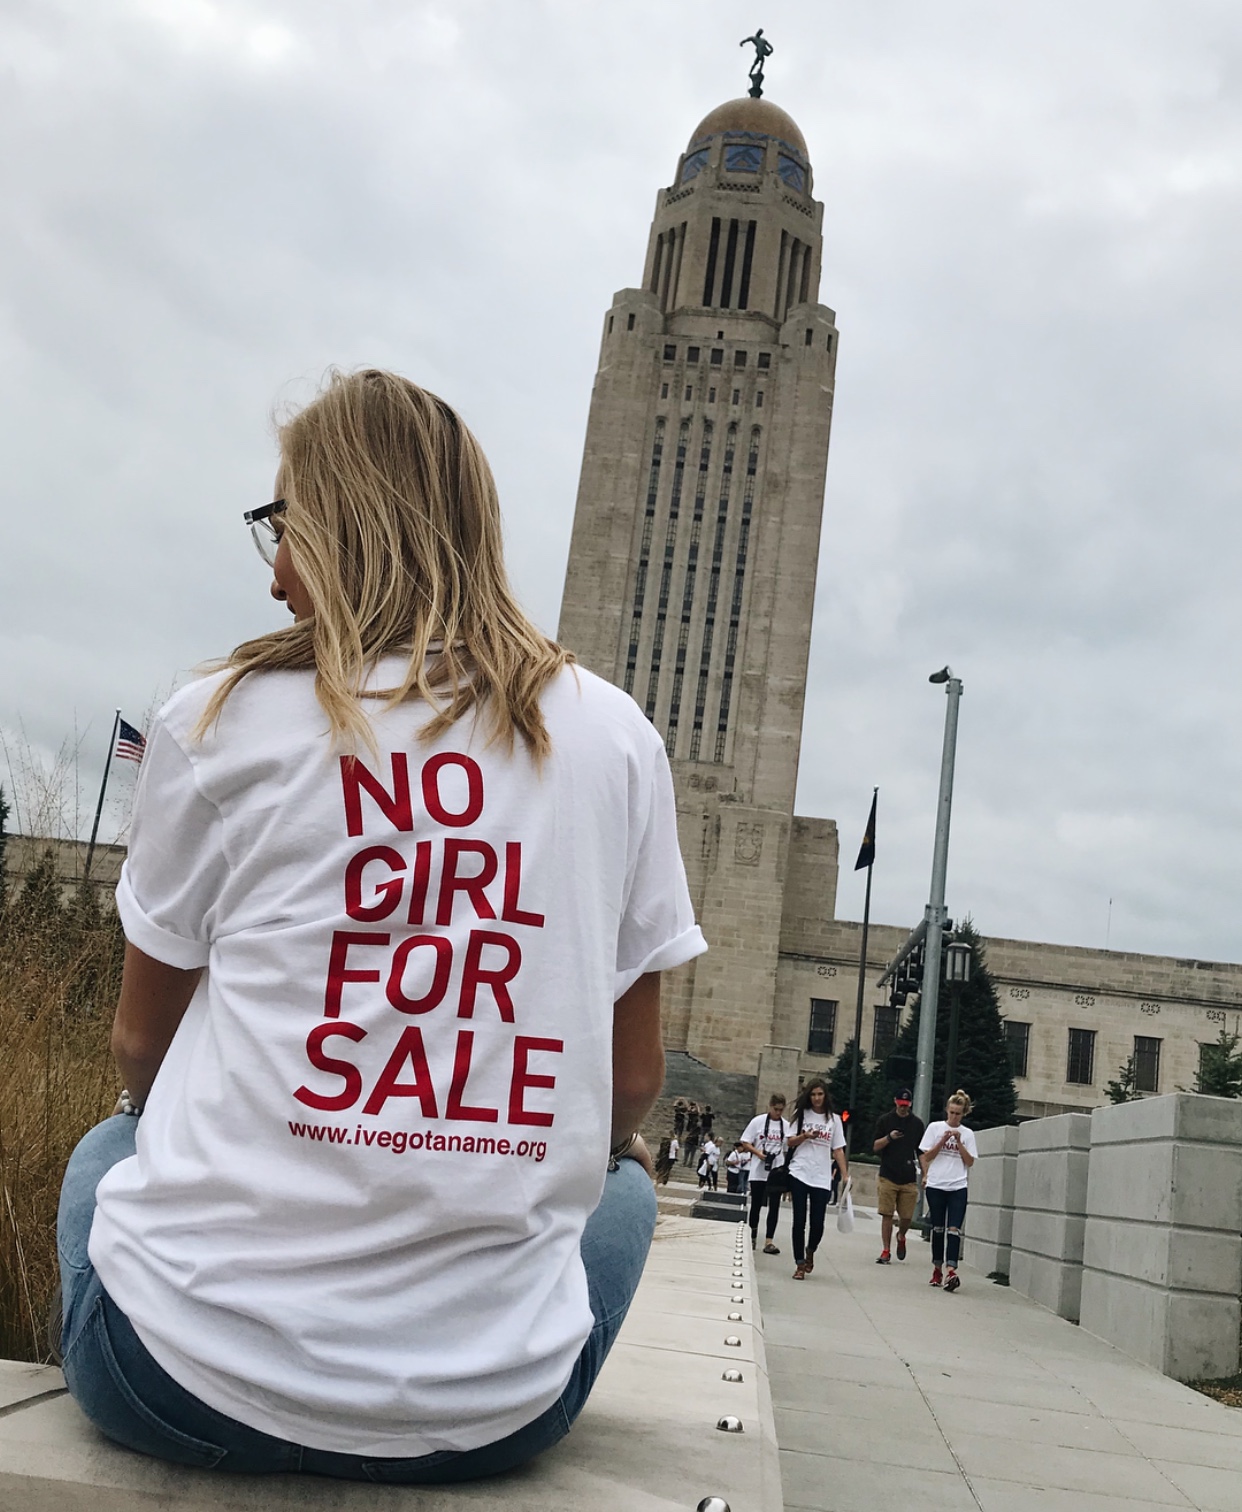 Maddie Schultz after participating in the Walk for Freedom march in late April 2018. The march sparked her passion for starting the student-led organization, I’m Not for Sale. Photo courtesy of Maddie Schultz.